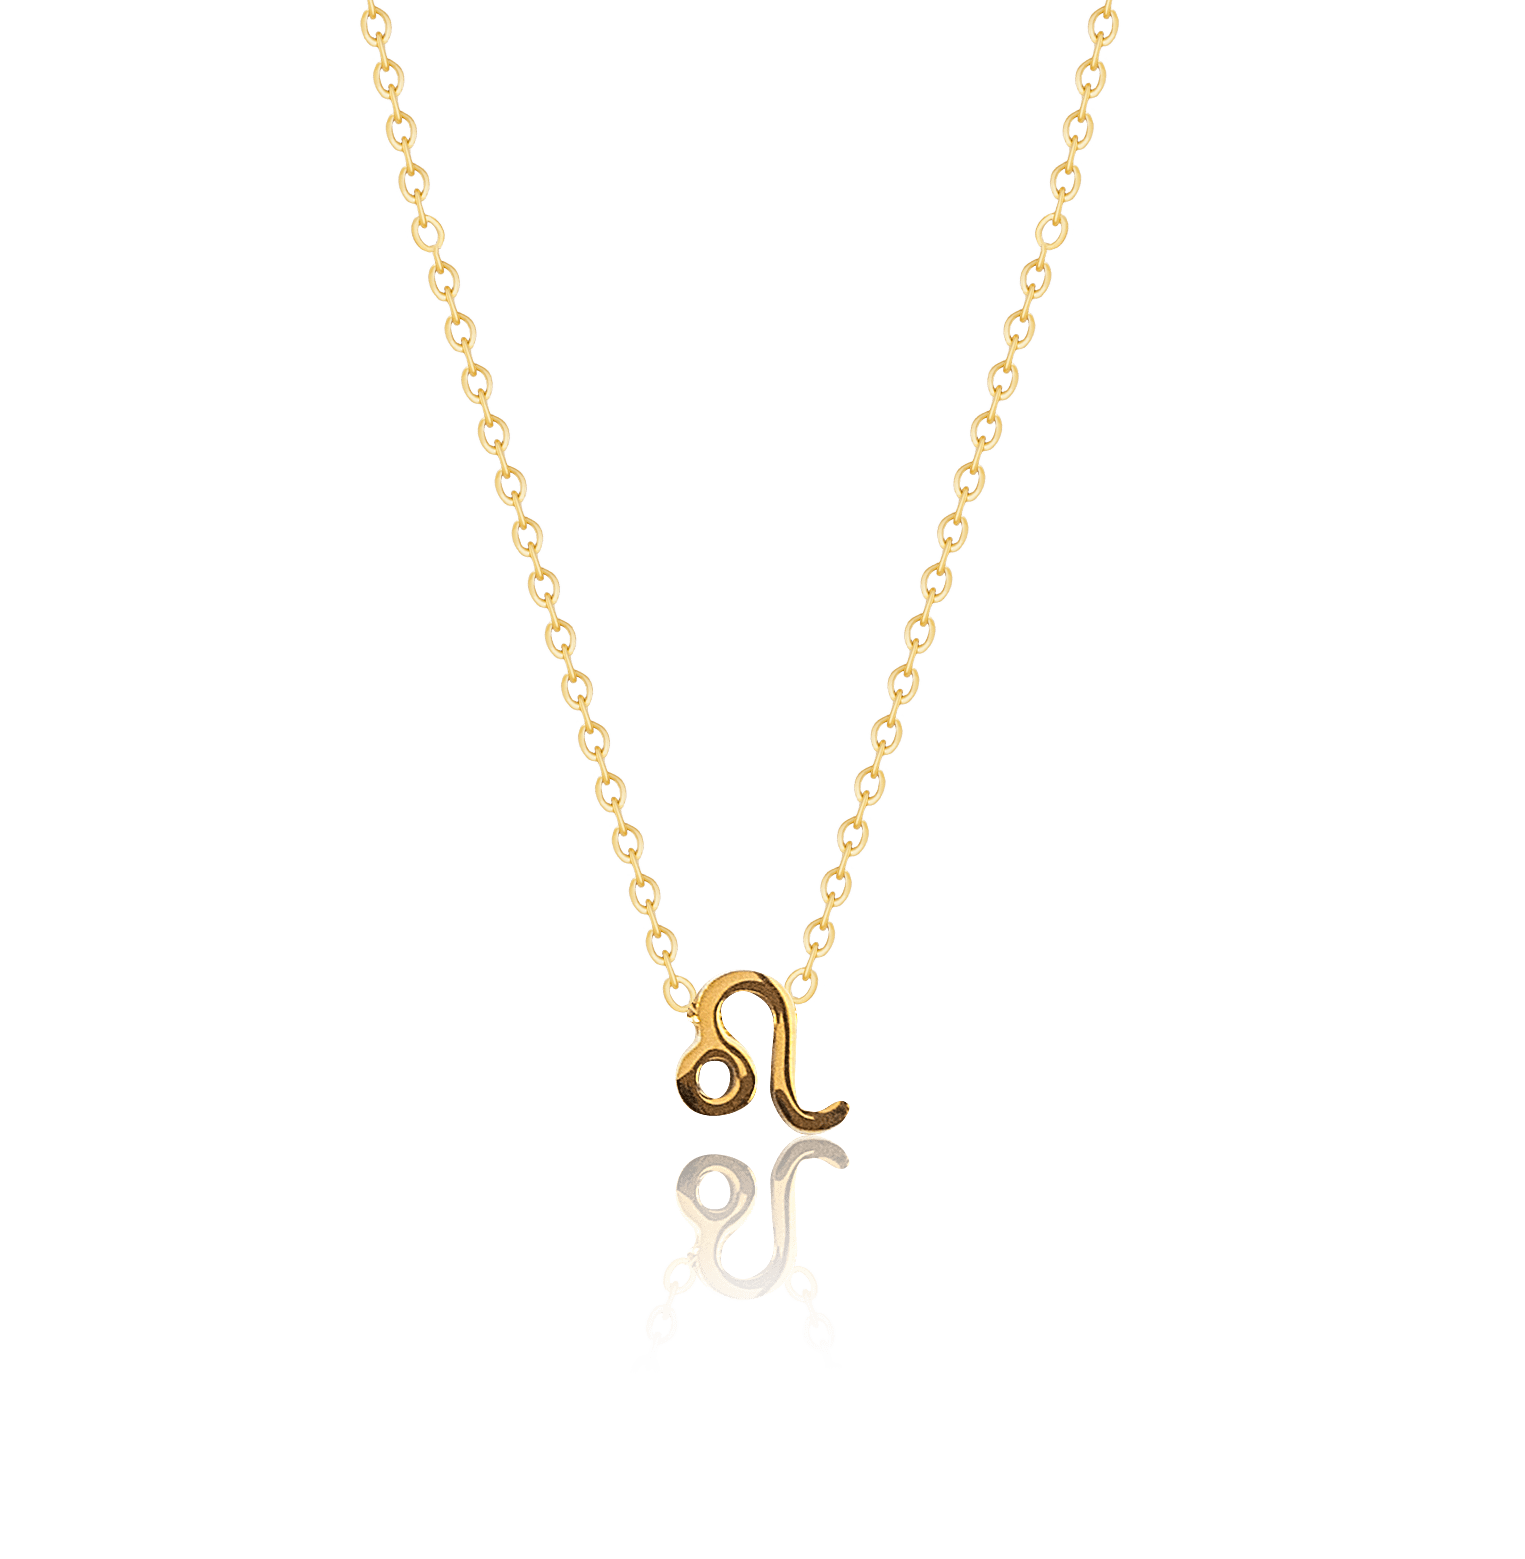 bianco rosso Necklaces Gold Leo - Necklace cyprus greece jewelry gift free shipping europe worldwide